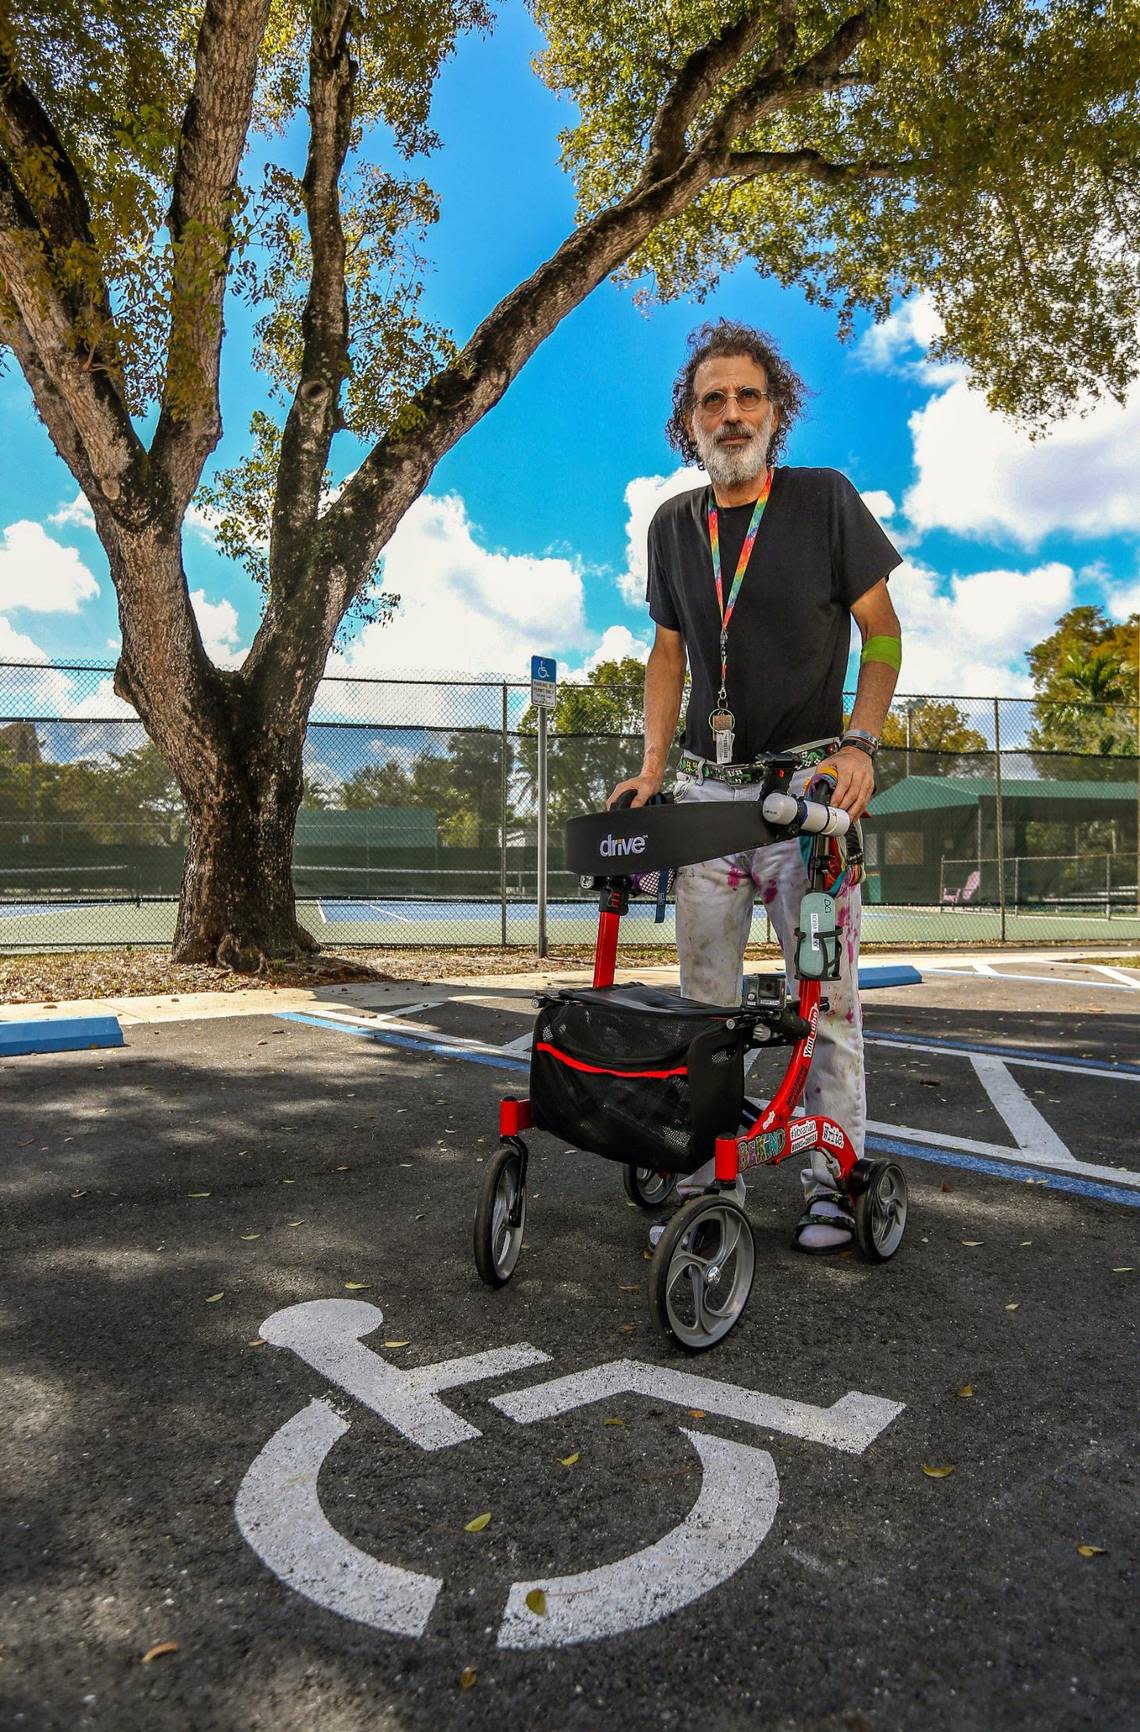 Theo Karantsalis launched a one-man battle to get the city where he lives, Miami Springs, to improve accessibility for the disabled at several locations. Here, he stands at a tennis court complex that he argued did not have adequate handicap parking spaces when he sued in 2019.